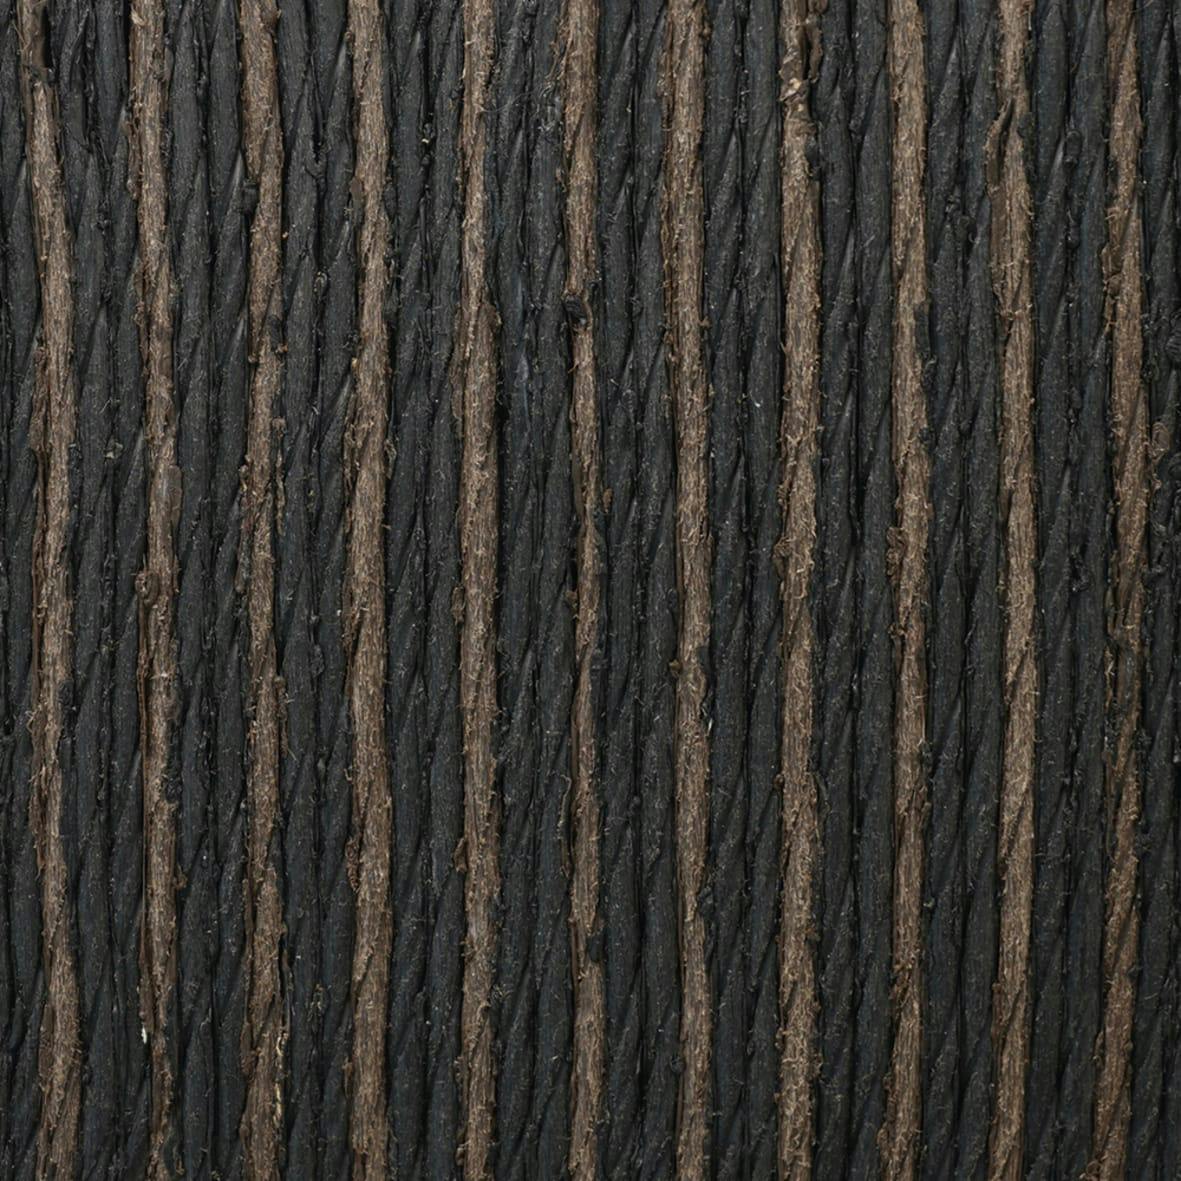 Umber Woven All-Weather Wicker